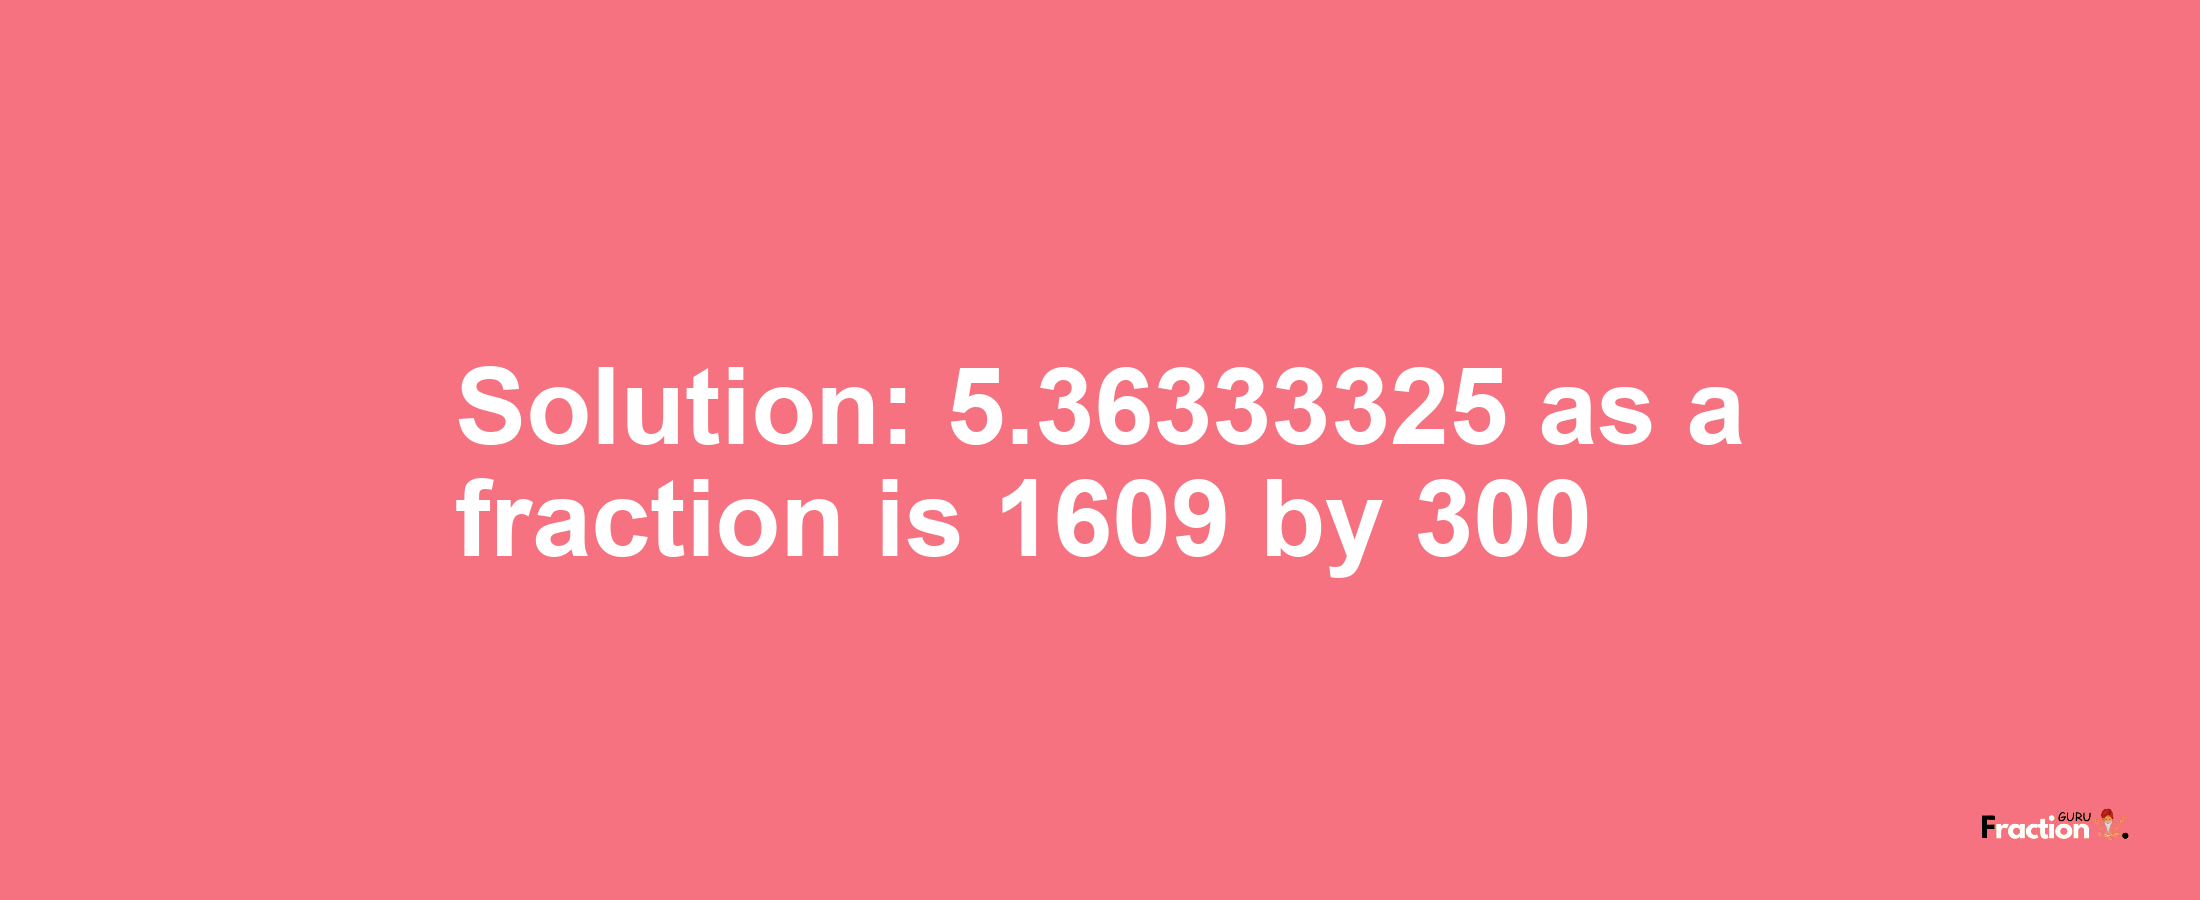 Solution:5.36333325 as a fraction is 1609/300